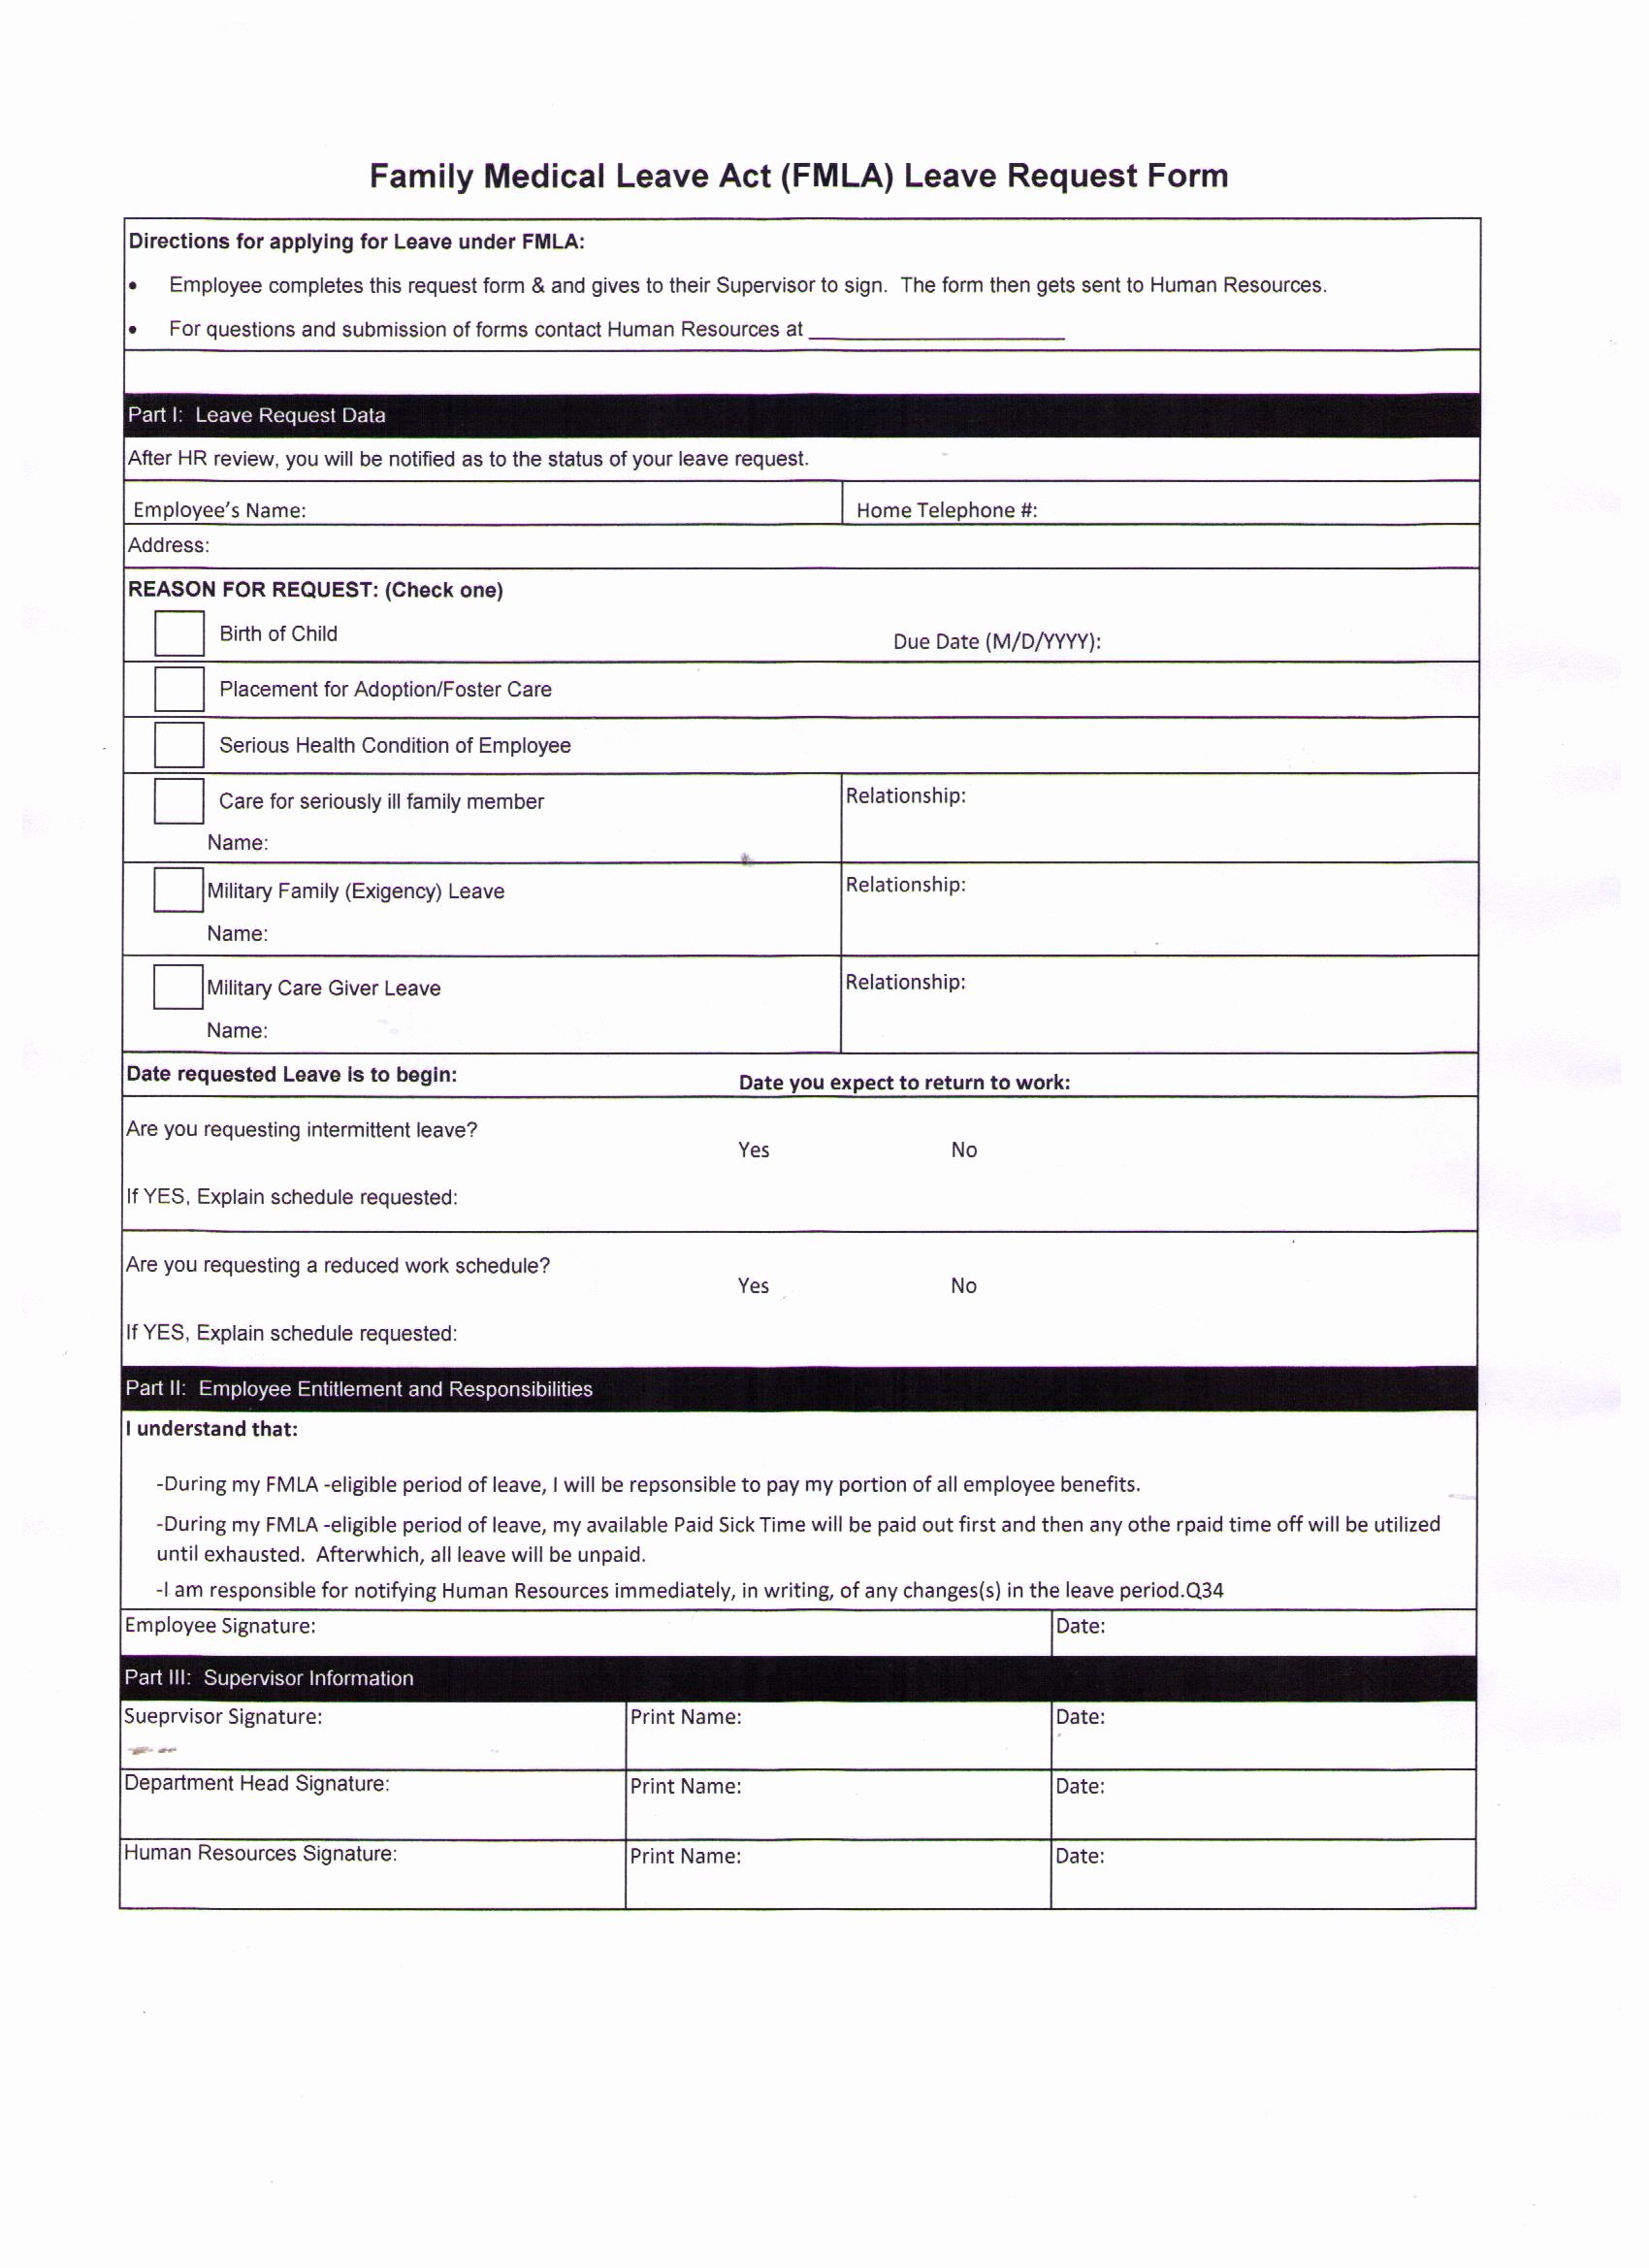 Resource Request form Fresh Human Resources toolkit forms